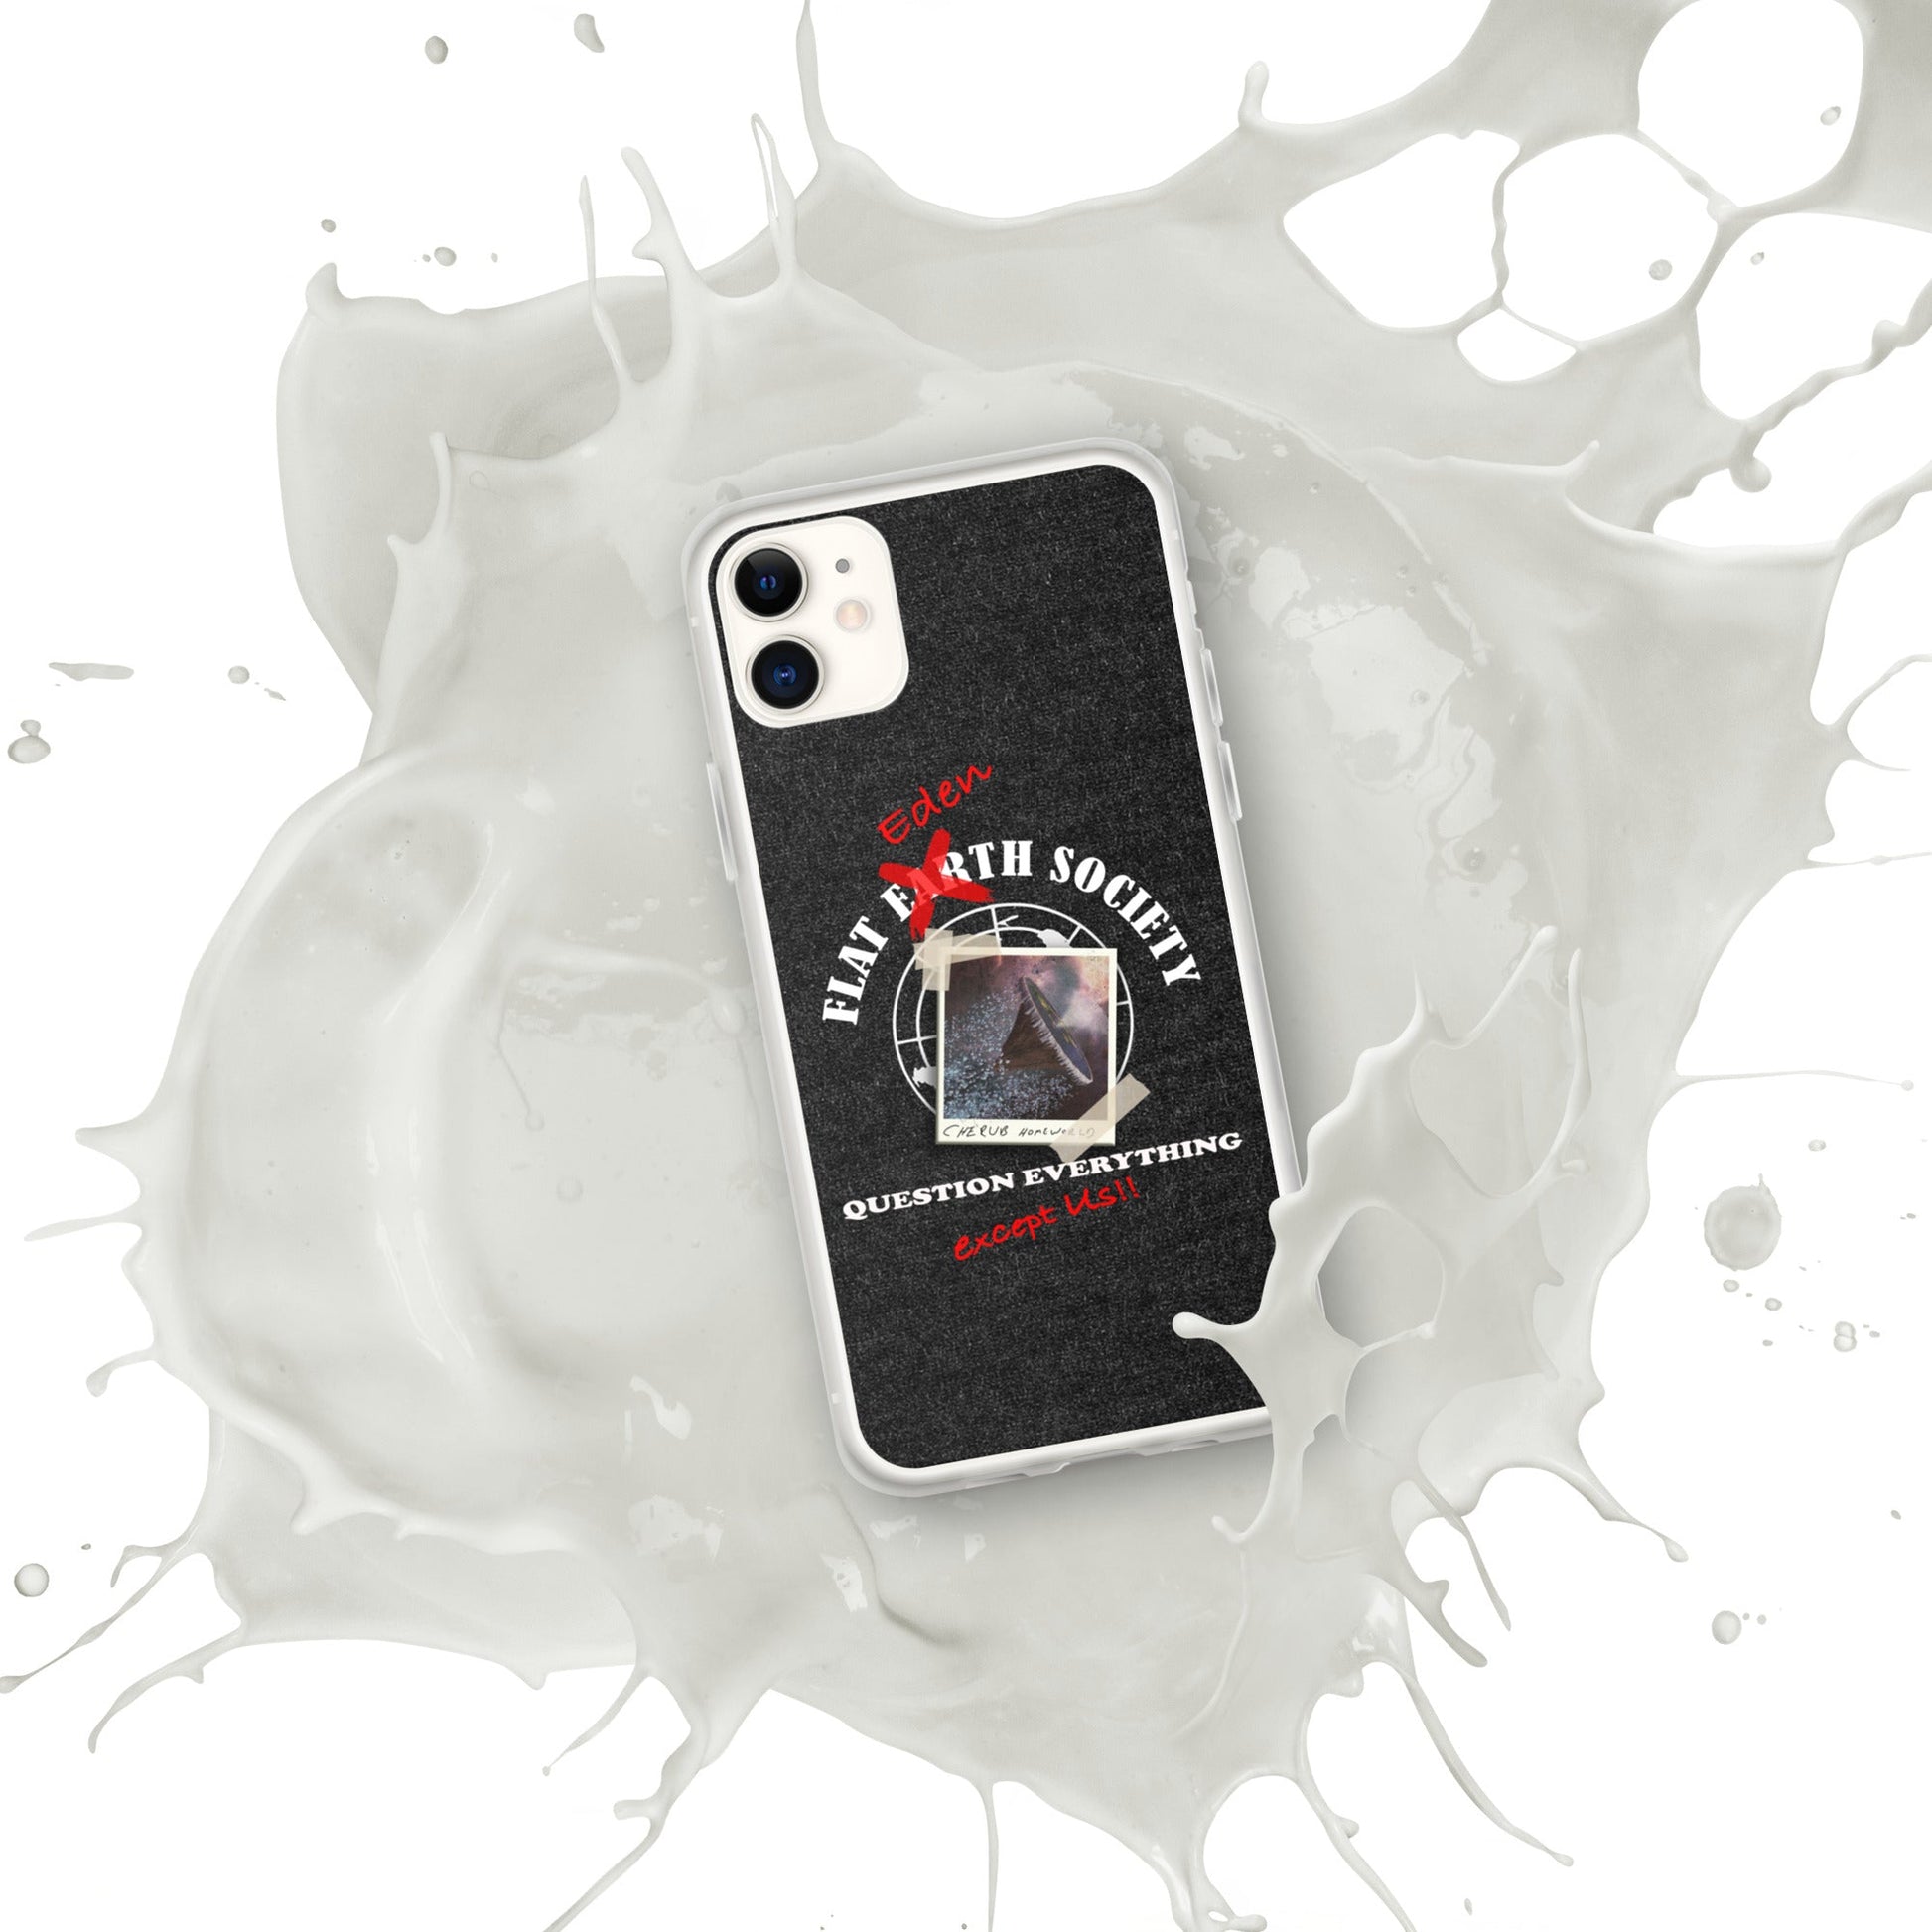 iPhone Case | Intergalactic Space Force 2 | Flat Eden Society - Spectral Ink Shop - Mobile Phone Cases -9780728_10994